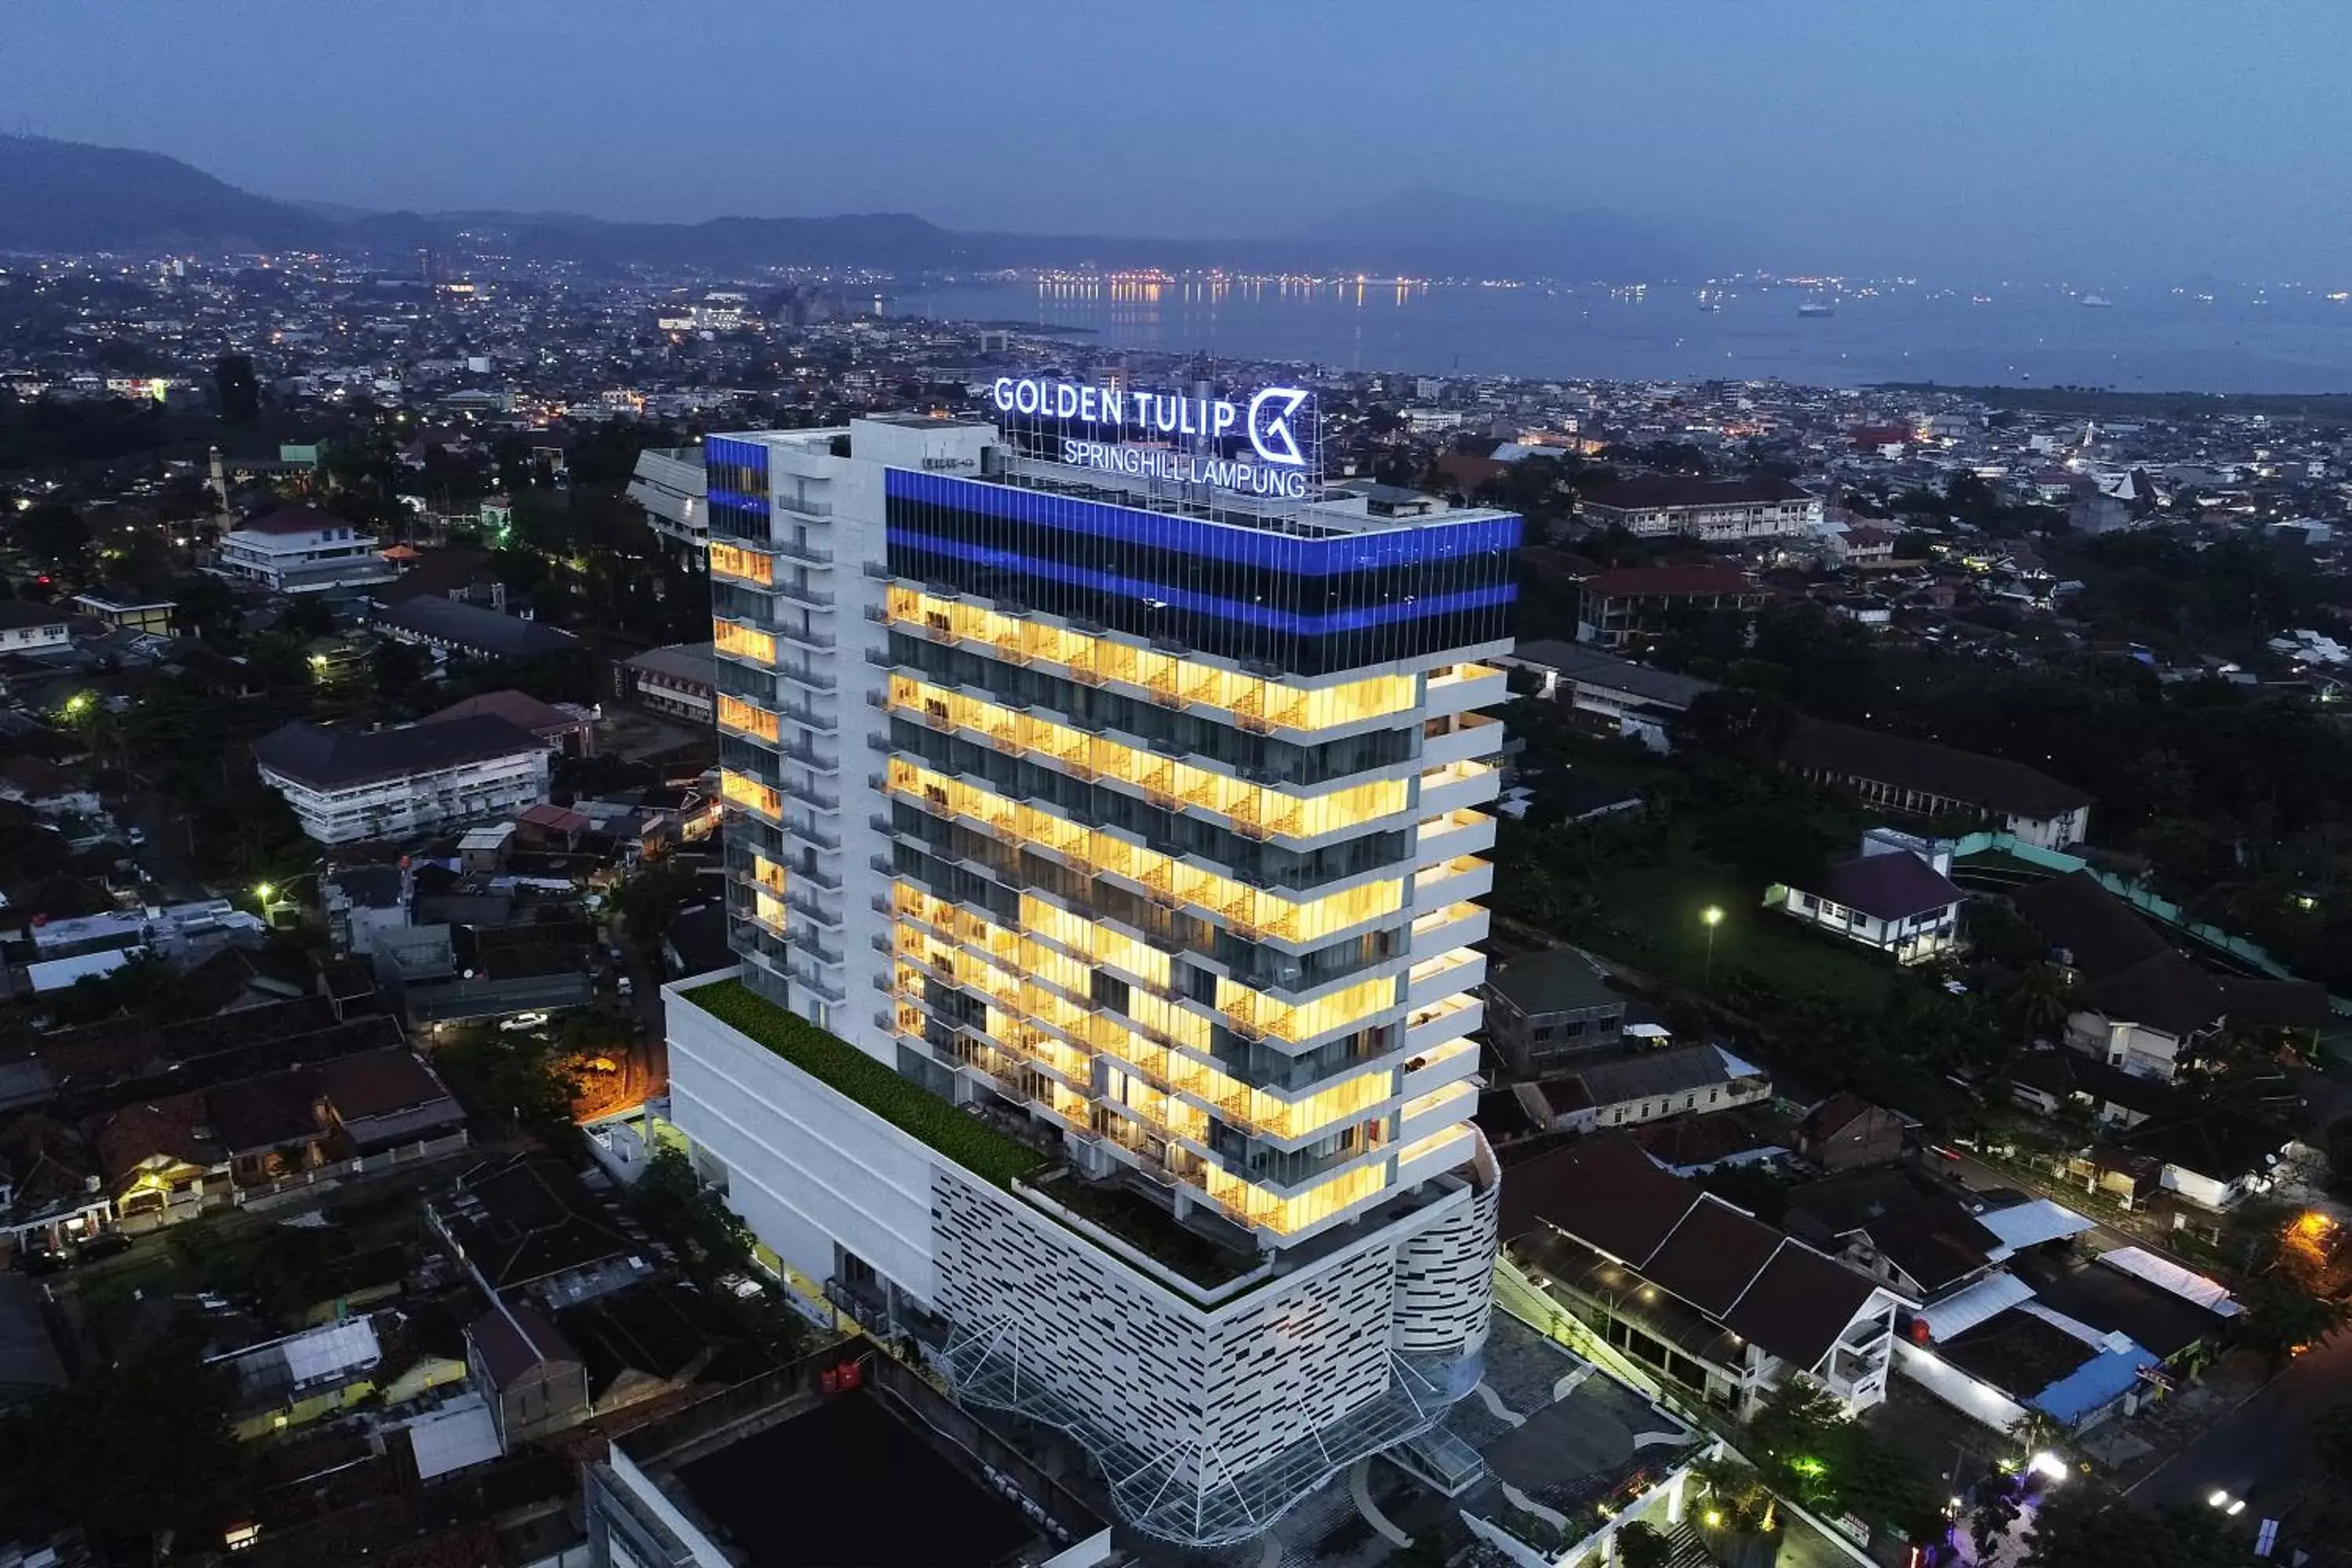 Property building, Bird's-eye View in Golden Tulip Springhill Lampung